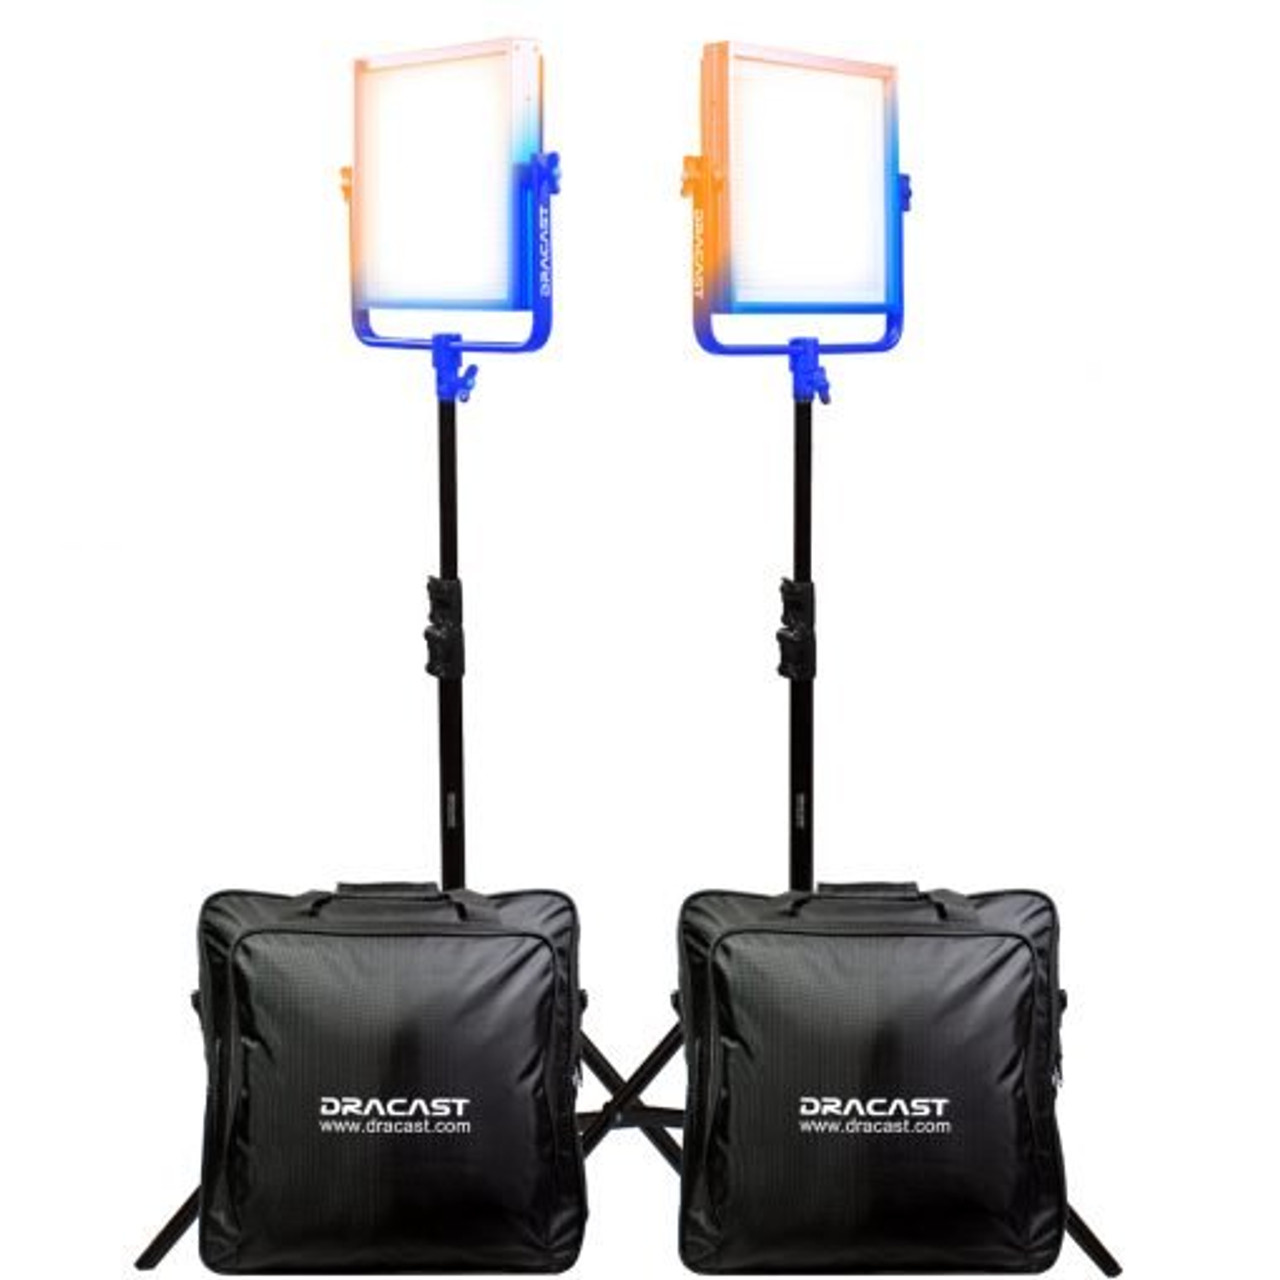 DRACO BROADCAST Pro Series LED1000 Bi-Color LED 2 Light Kit with Gold Mount Battery Plates and Light Stands (DR1000BCG2KQ)